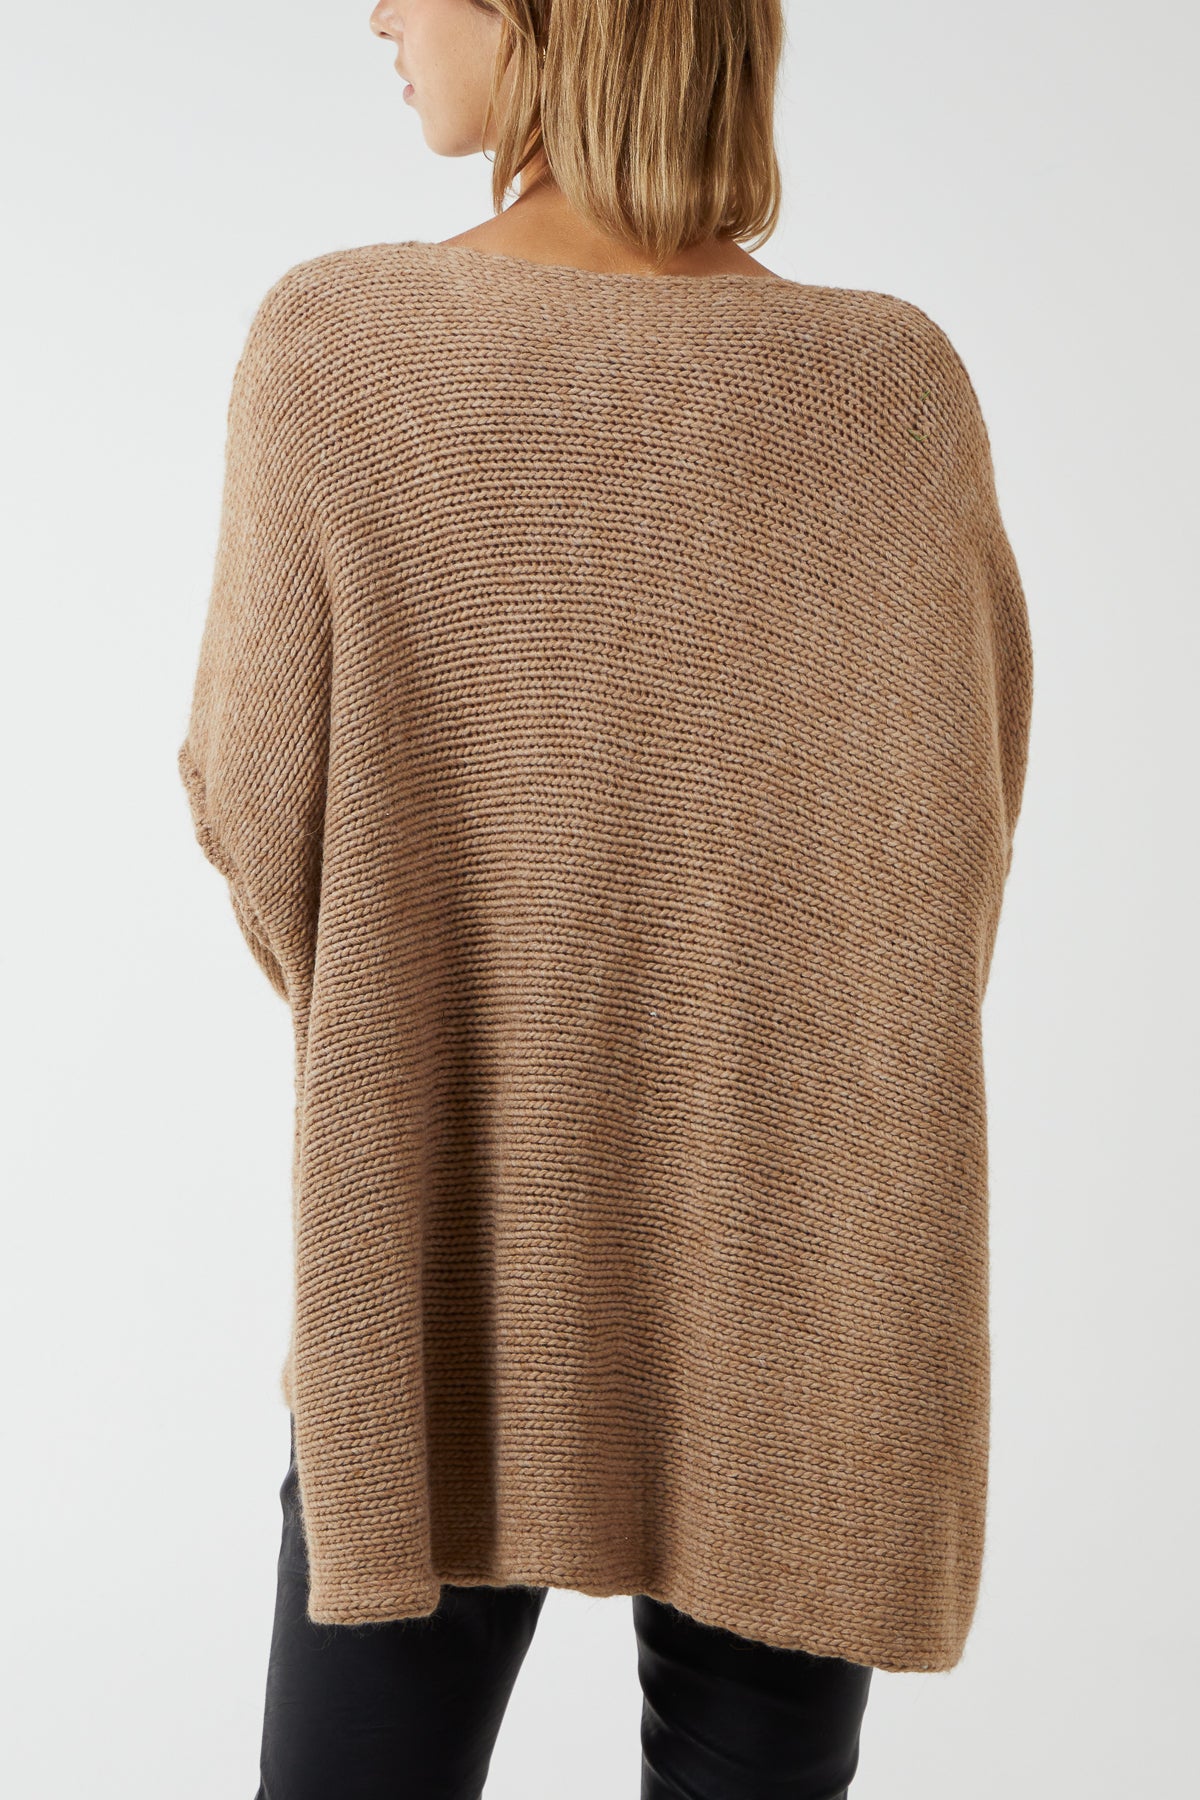 Exposed Seams Deconstructed Pocket Oversized Jumper